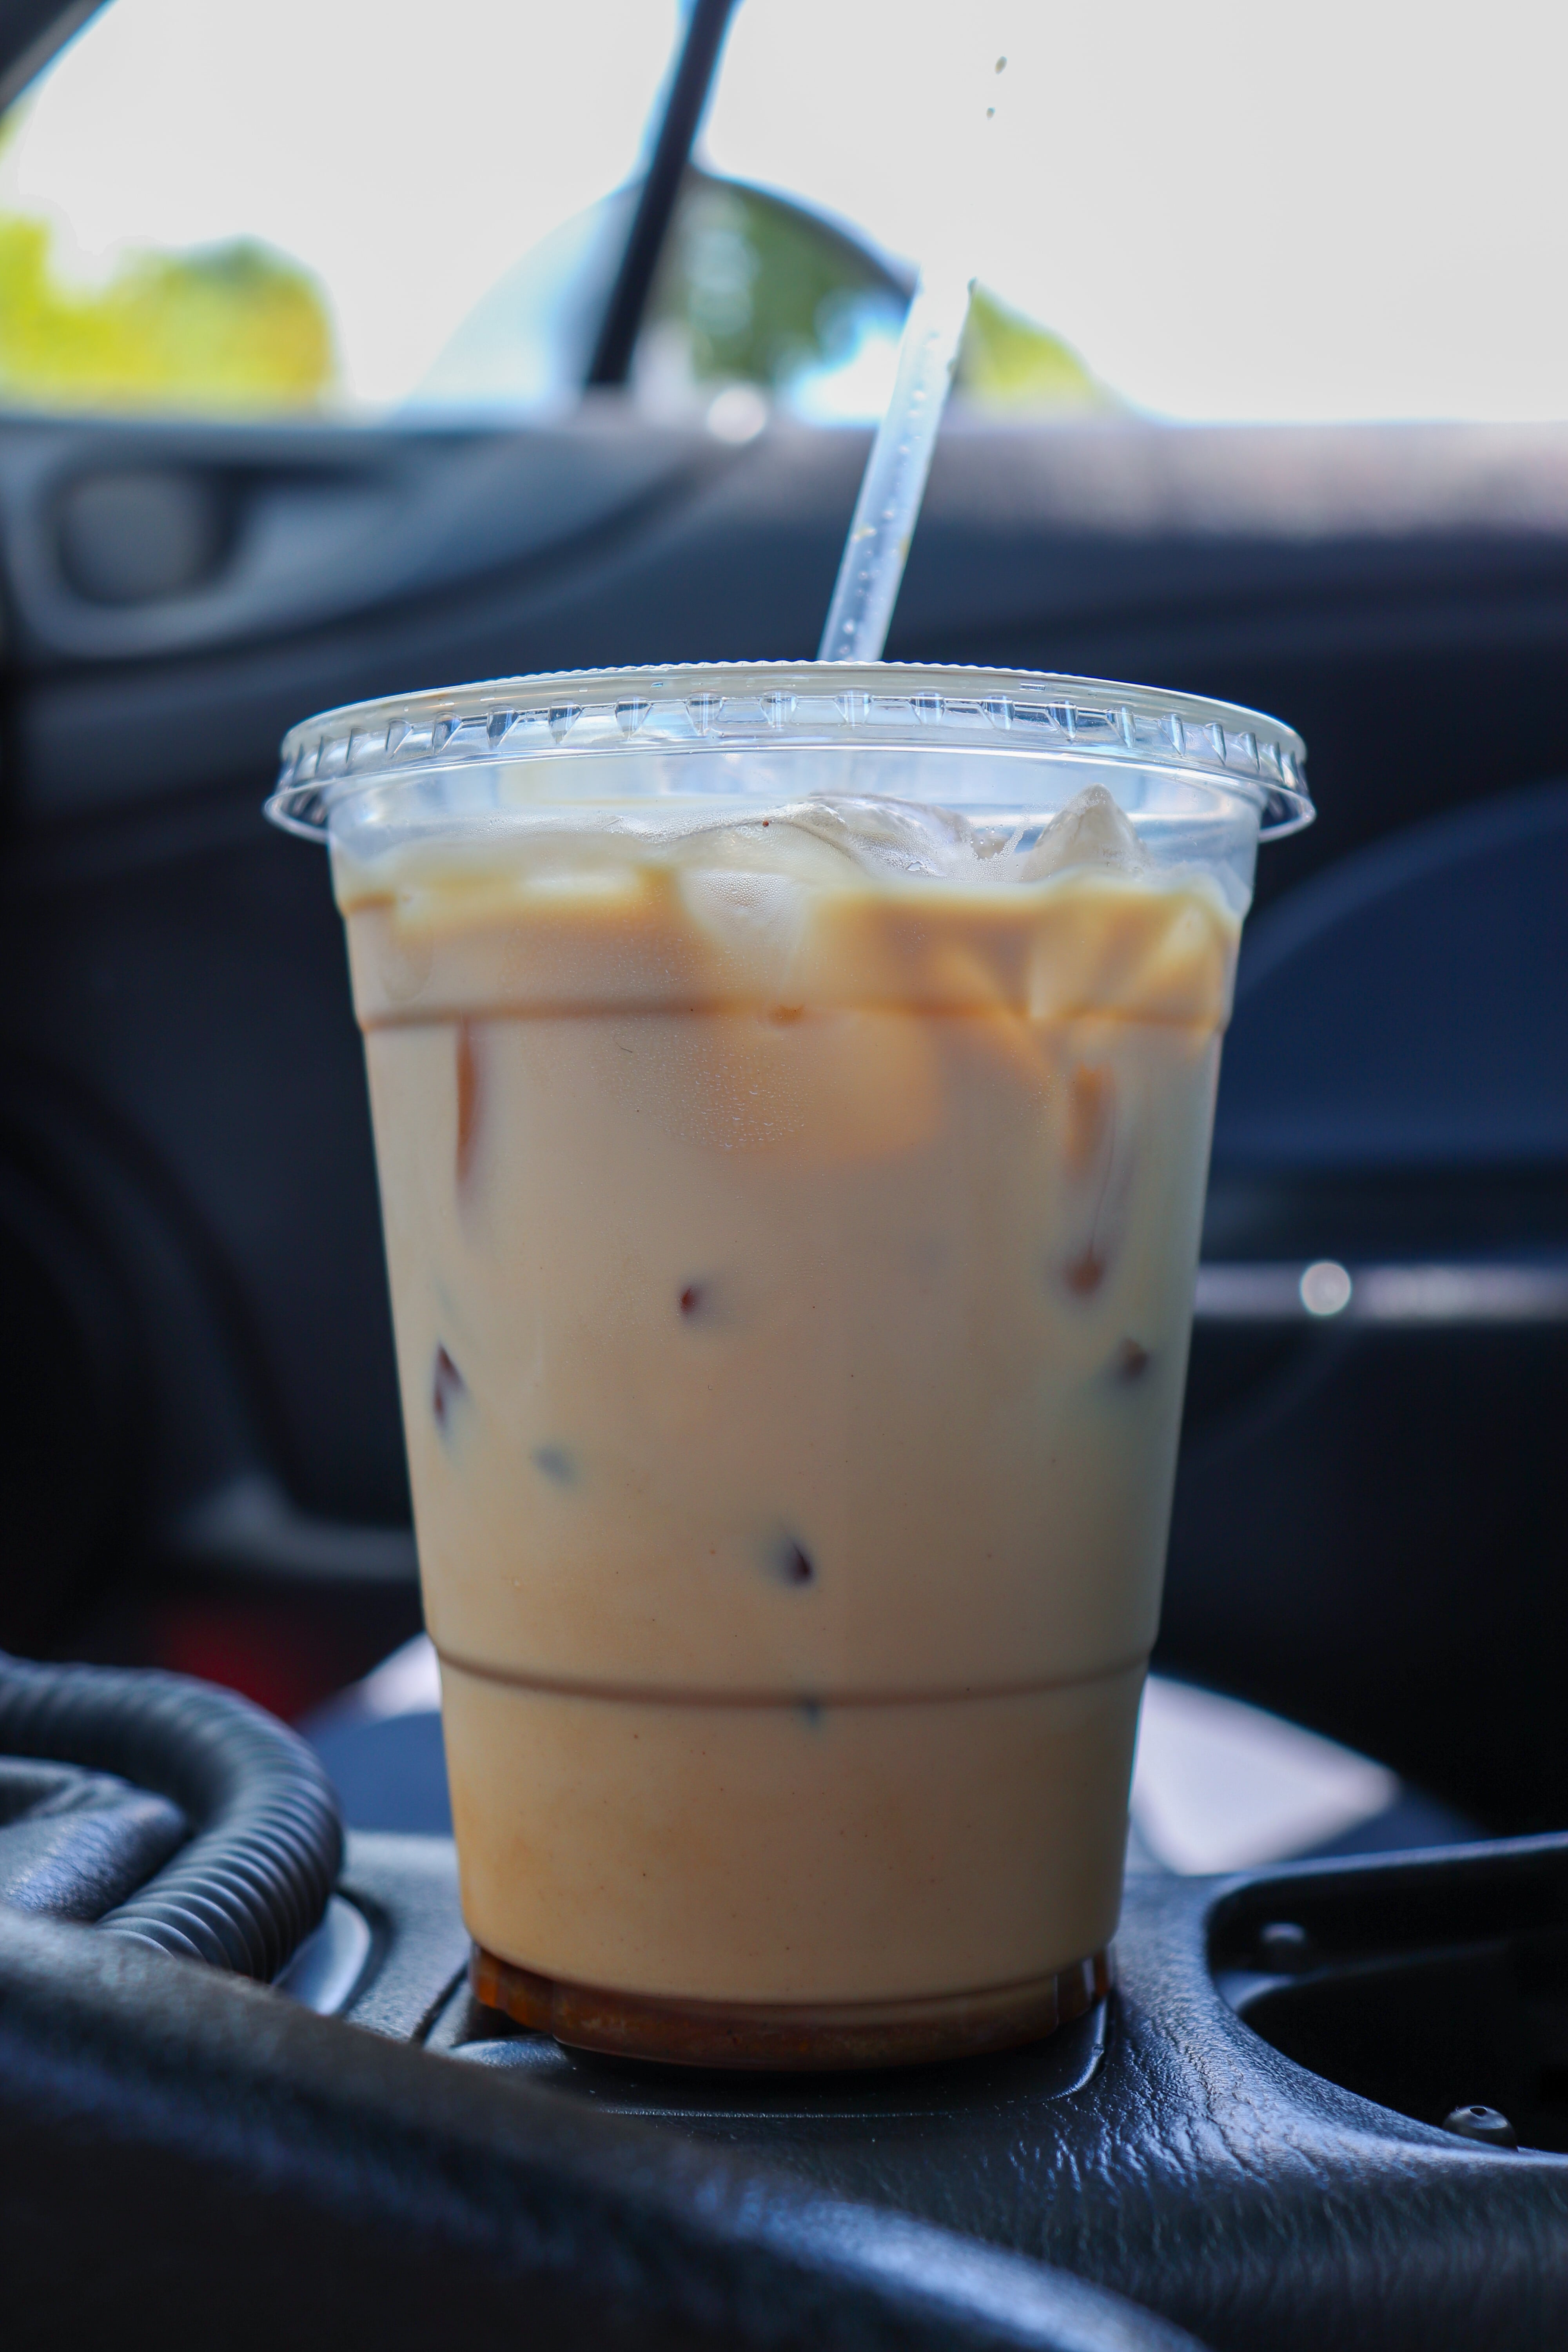 You are currently viewing The Top 10 Drive-Thru Coffee Shops in Chattanooga